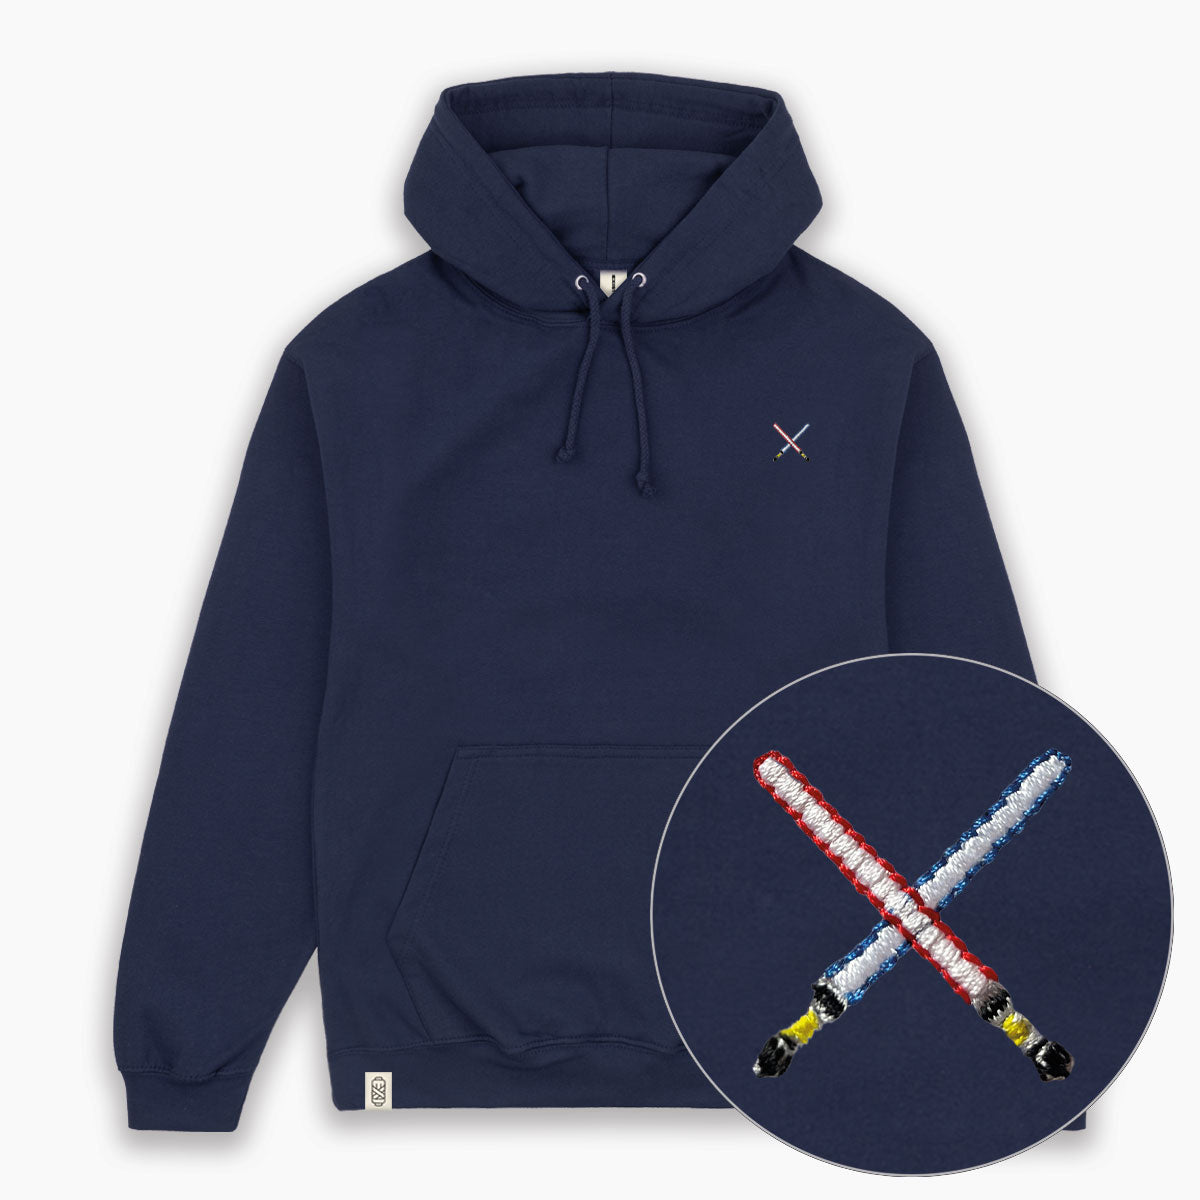 Intergalactic Swords Embroidered Hoodie (Unisex) product